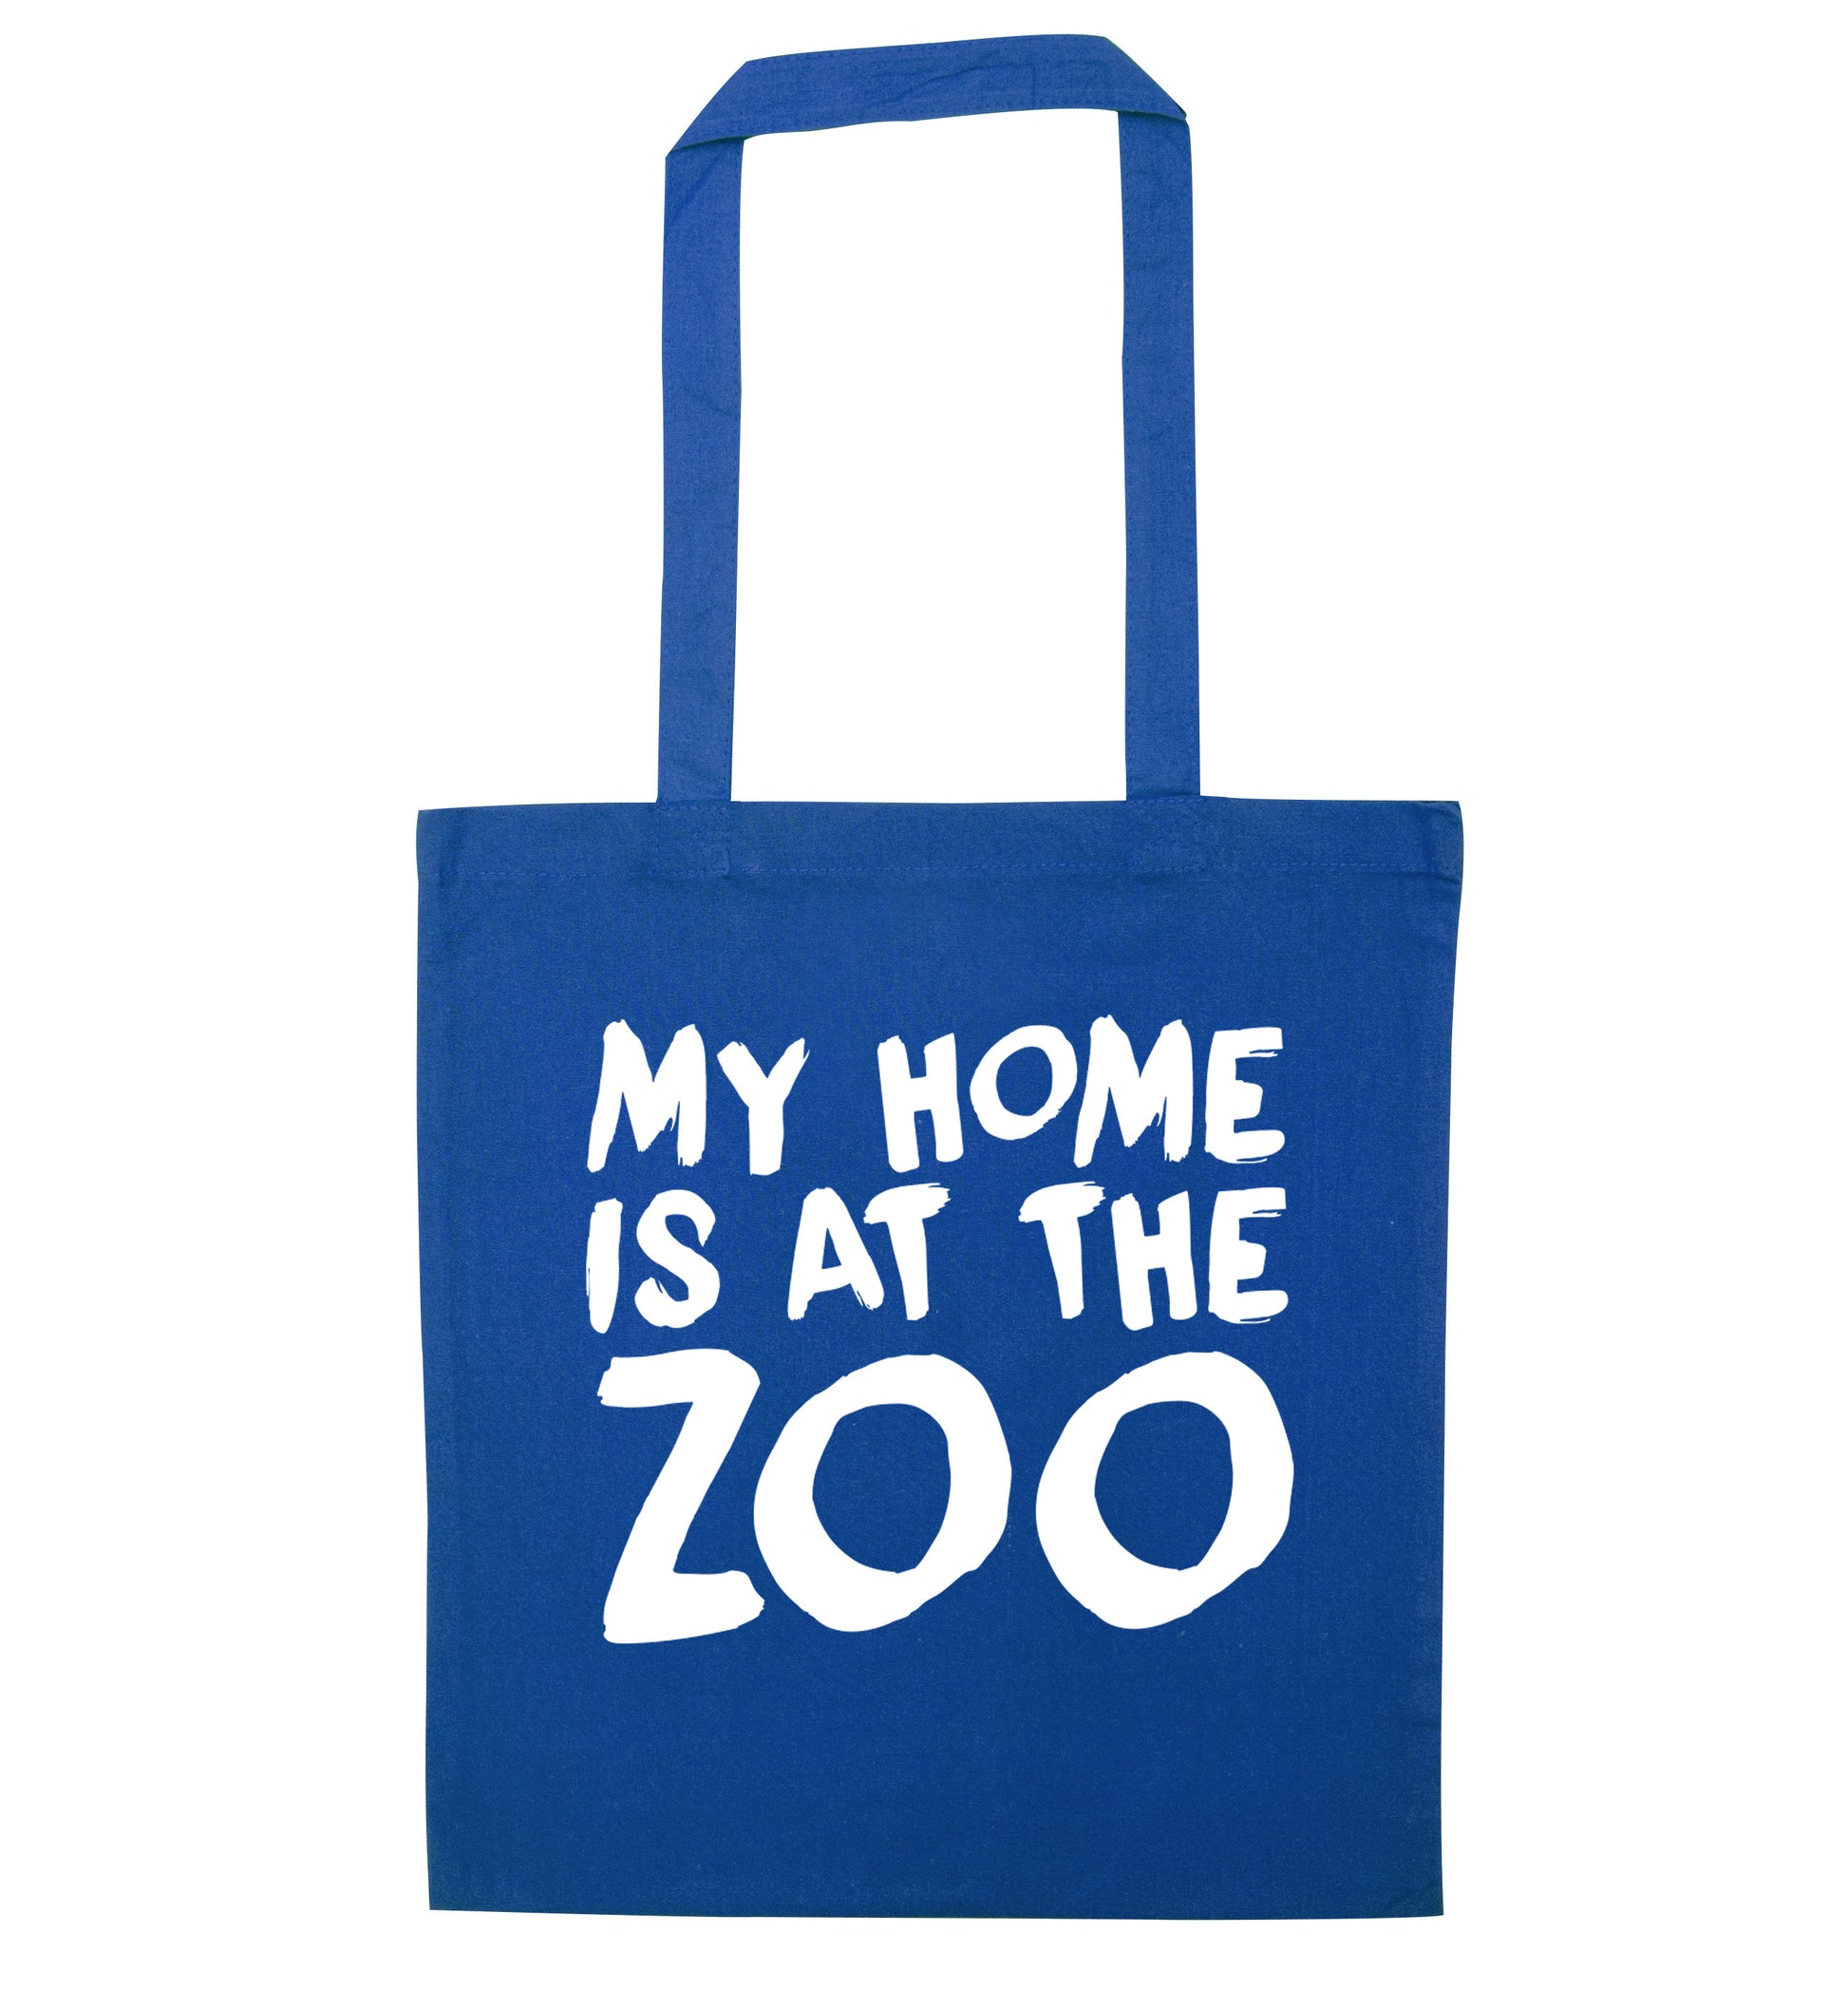 My home is at the zoo blue tote bag